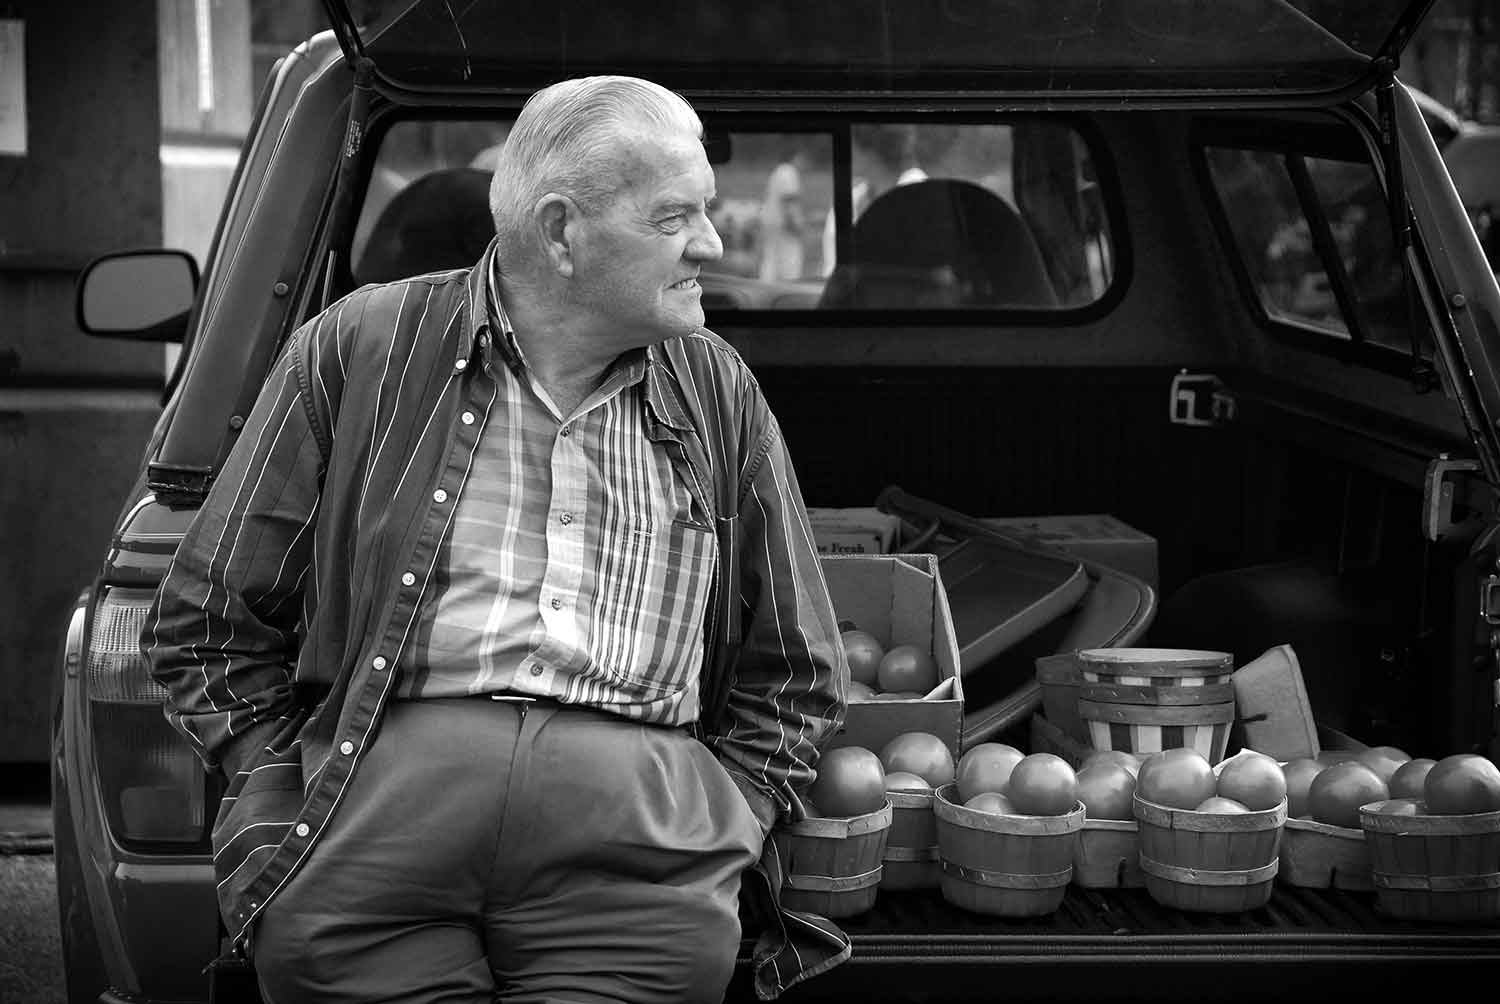 Jim Mayfield waits for customers who are drawn to his ripe Florida tomatoes. photo by Paul F. Hassell - 2007